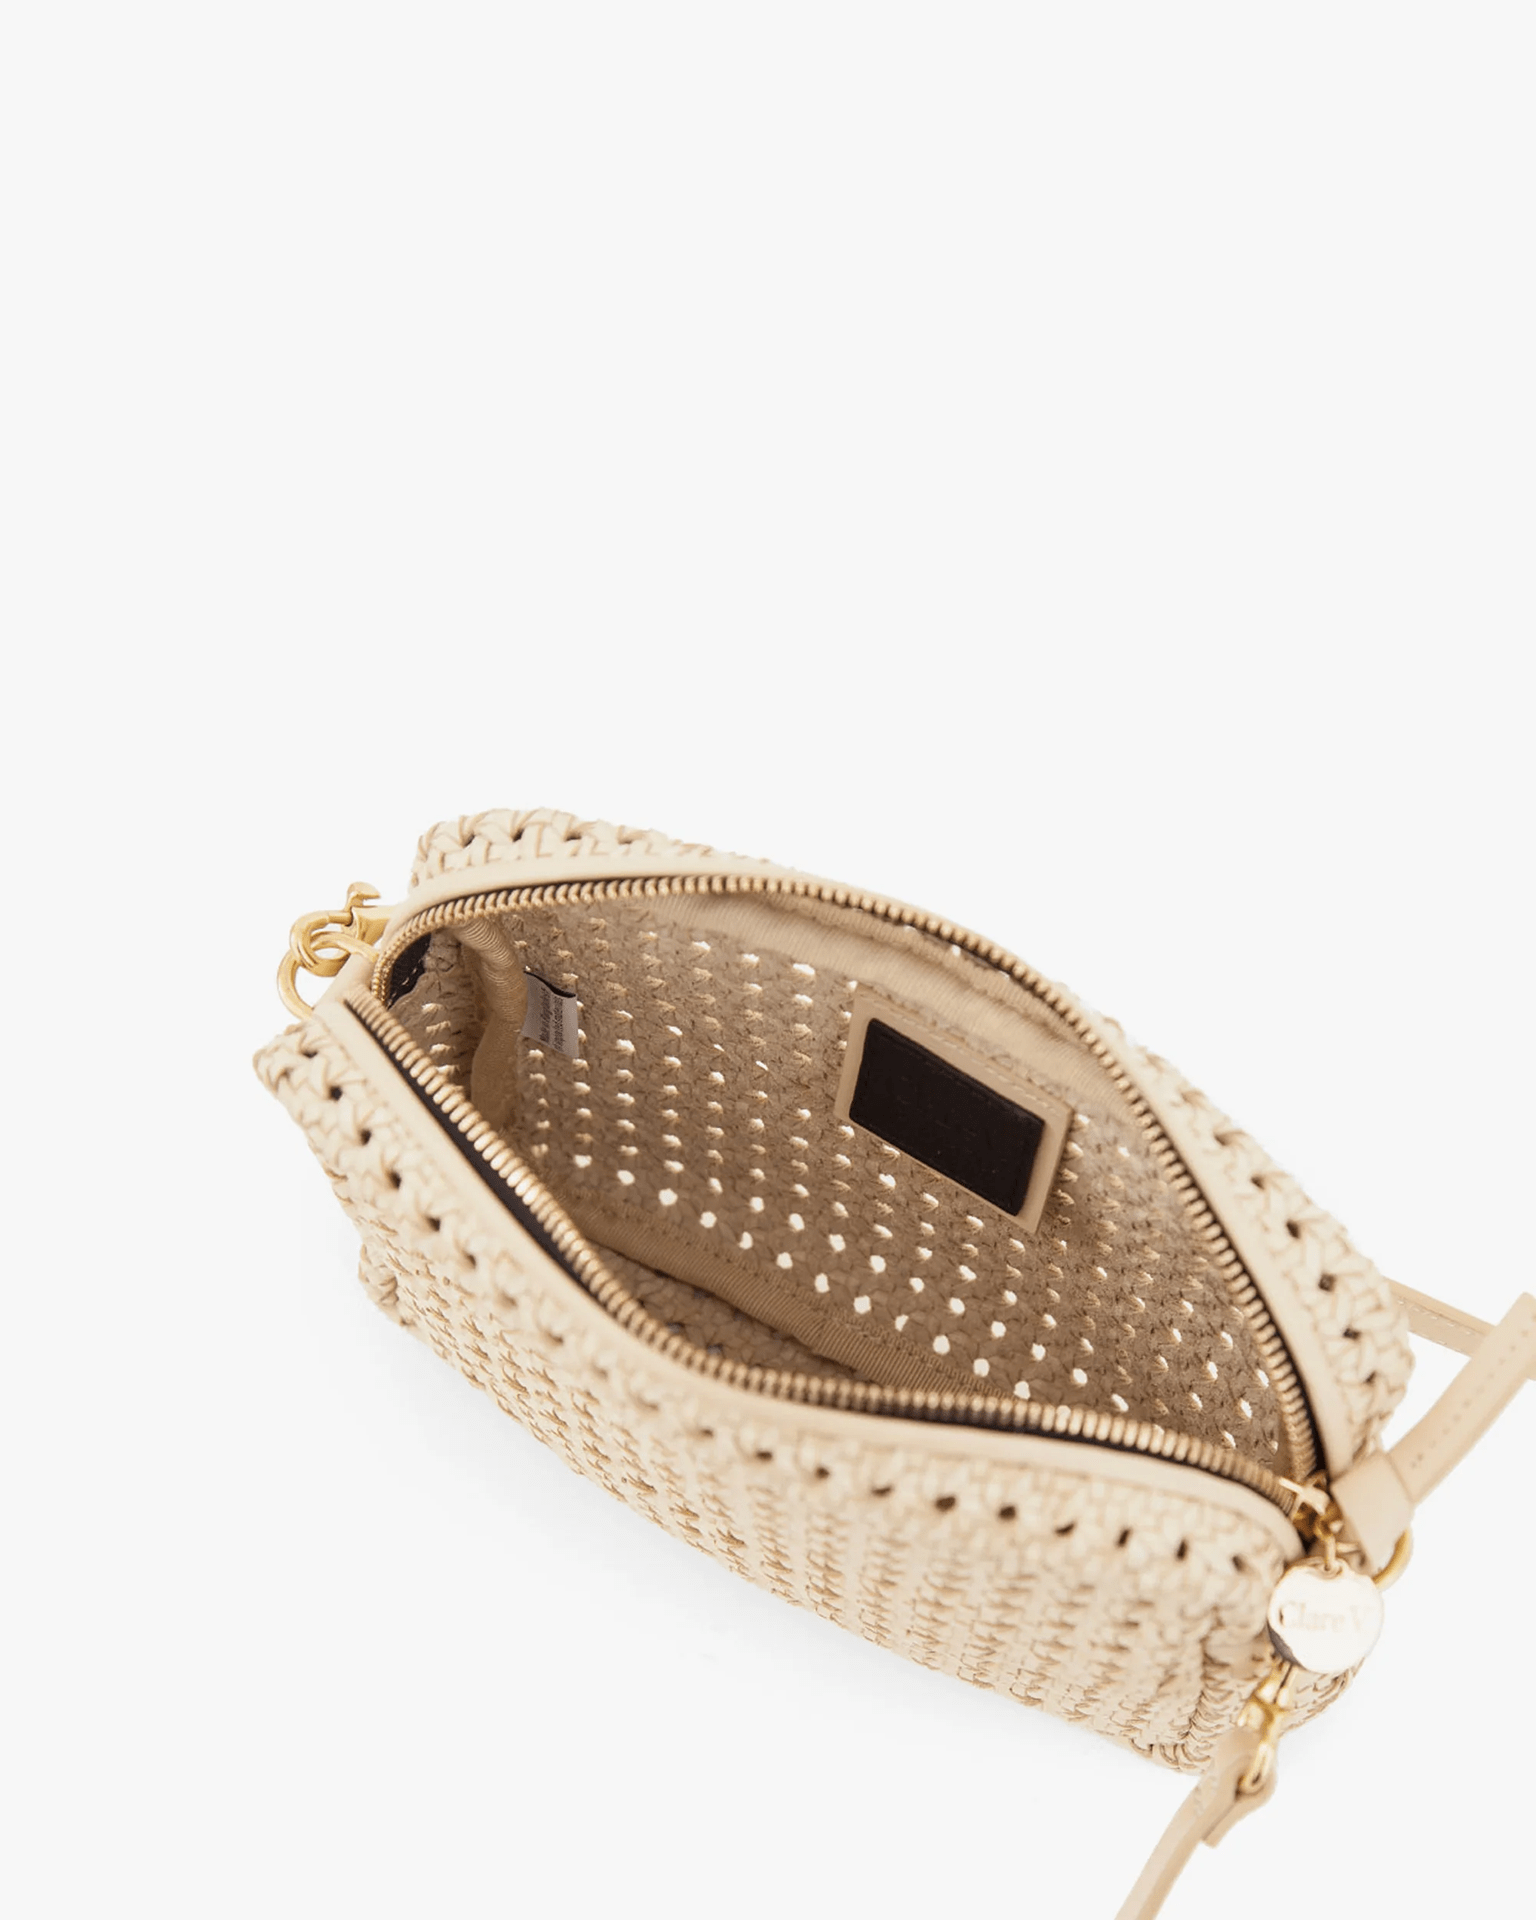 Clare V. Rattan Petit Simple Tote in Cream - Bliss Boutiques